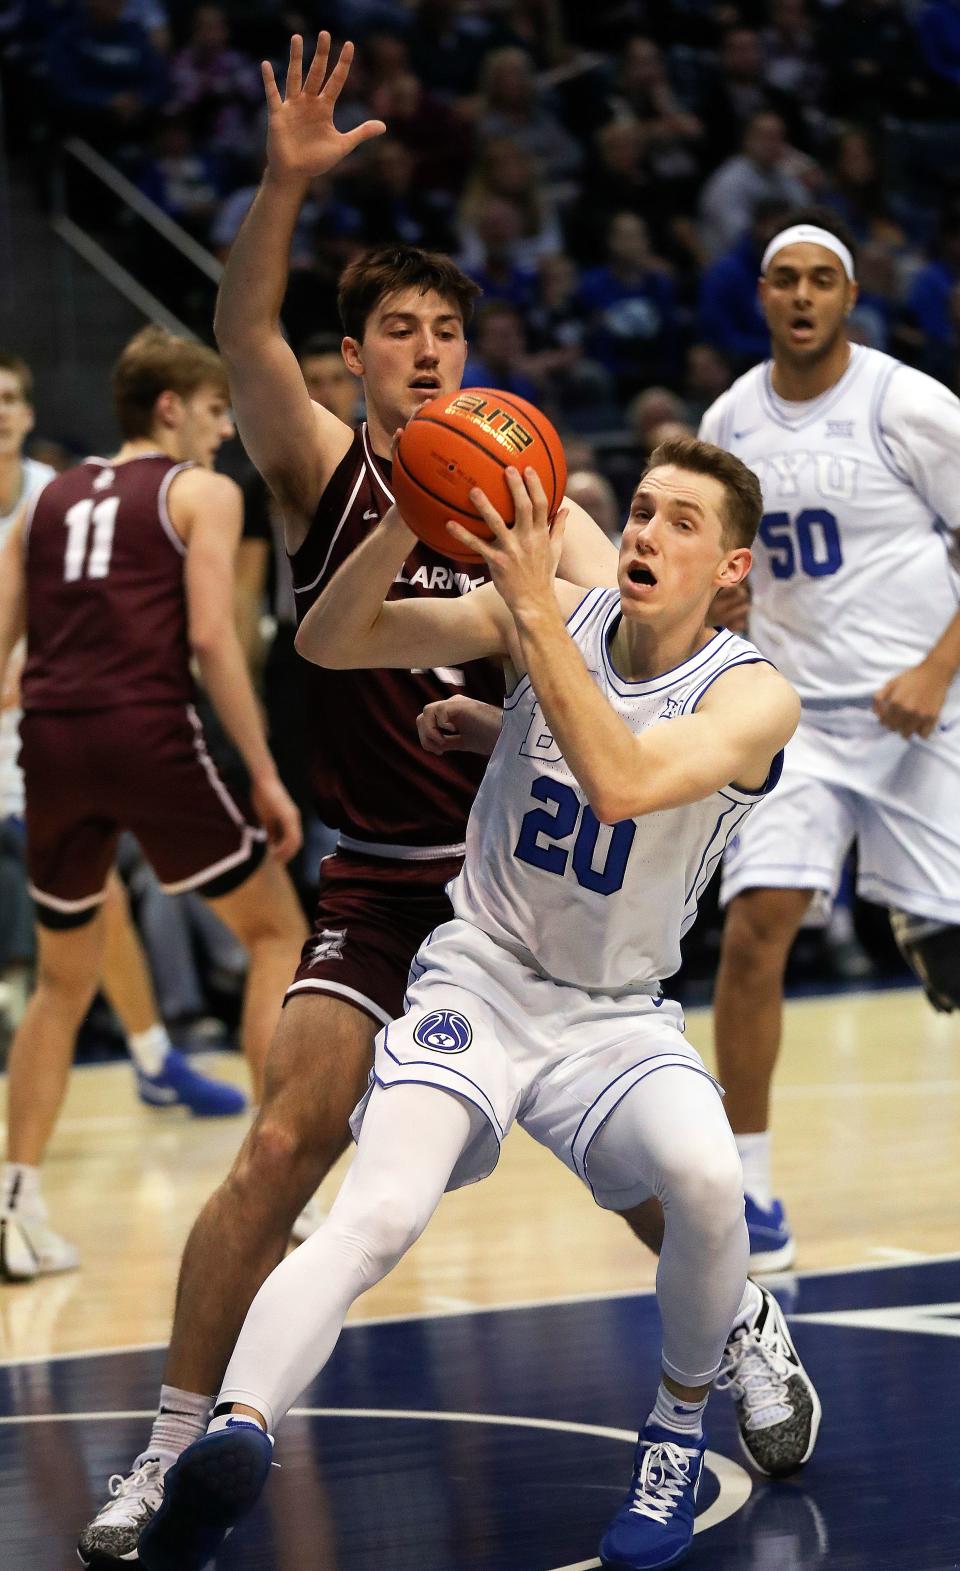 Brigham Young Cougars guard Spencer Johnson (20) looks to make a pass around Bellarmine Knights forward Langdon Hatton (12) during a men’s basketball game at the Marriott Center in Provo on Friday, Dec. 22, 2023. BYU won 101-59. | Kristin Murphy, Deseret News